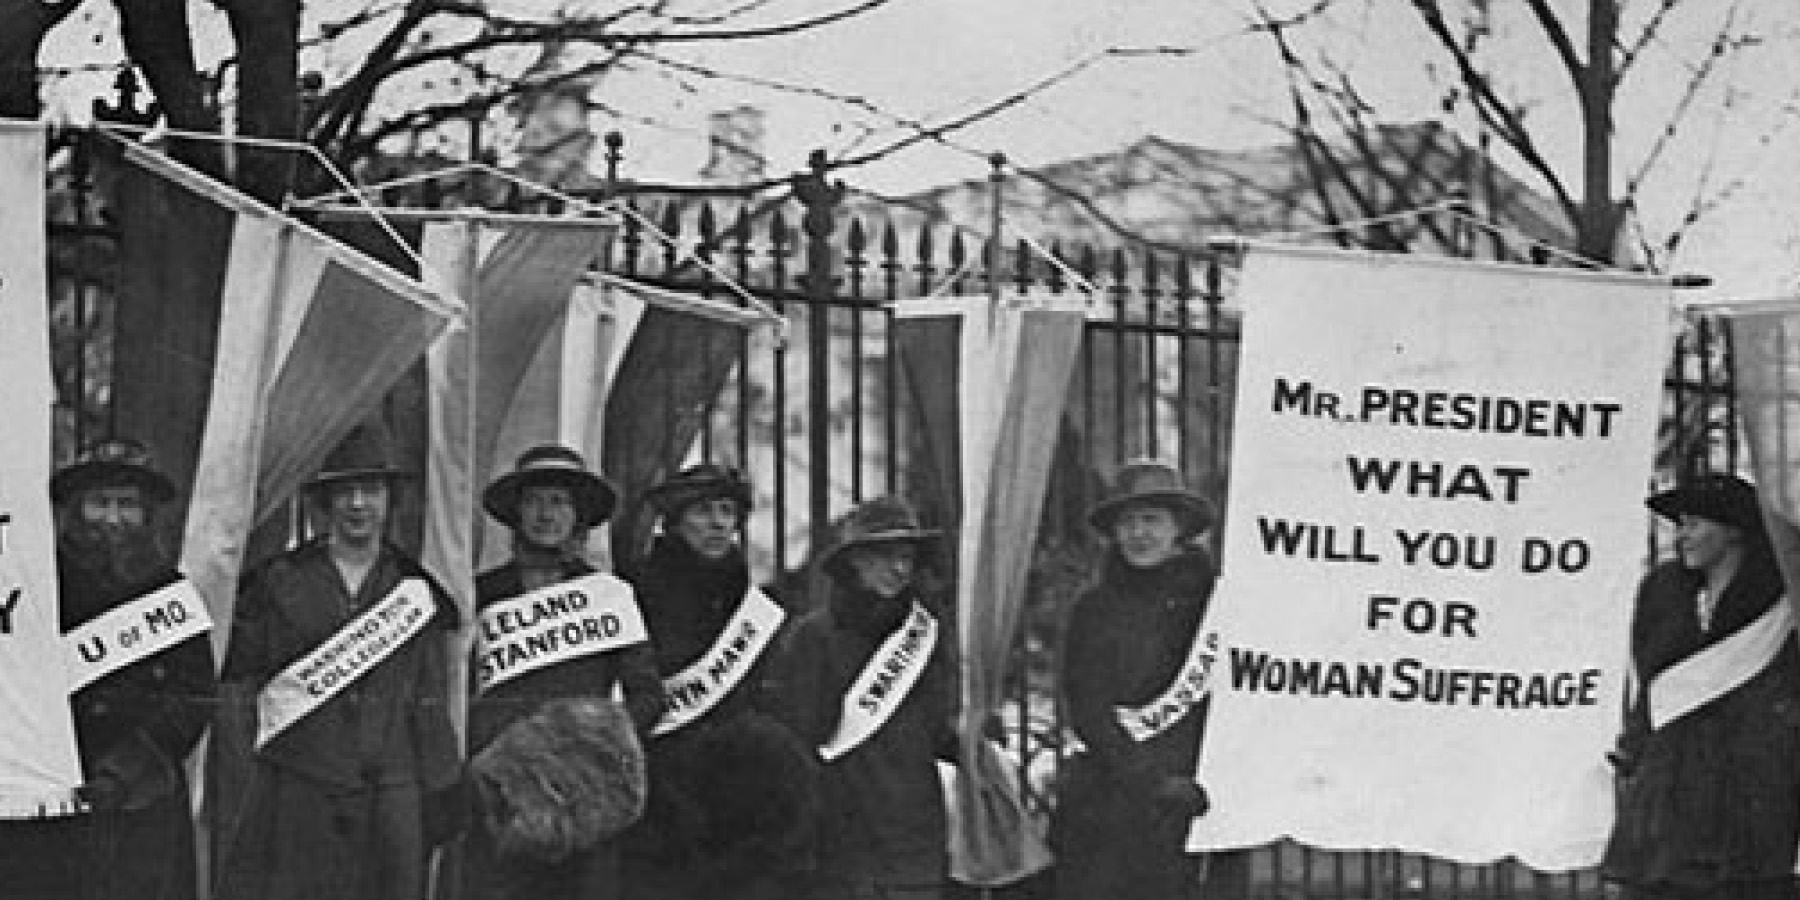 Film & Lecture Series: “Soothing the ‘Savage Hearts of Man’: Women’s Suffrage and Rural Missouri”